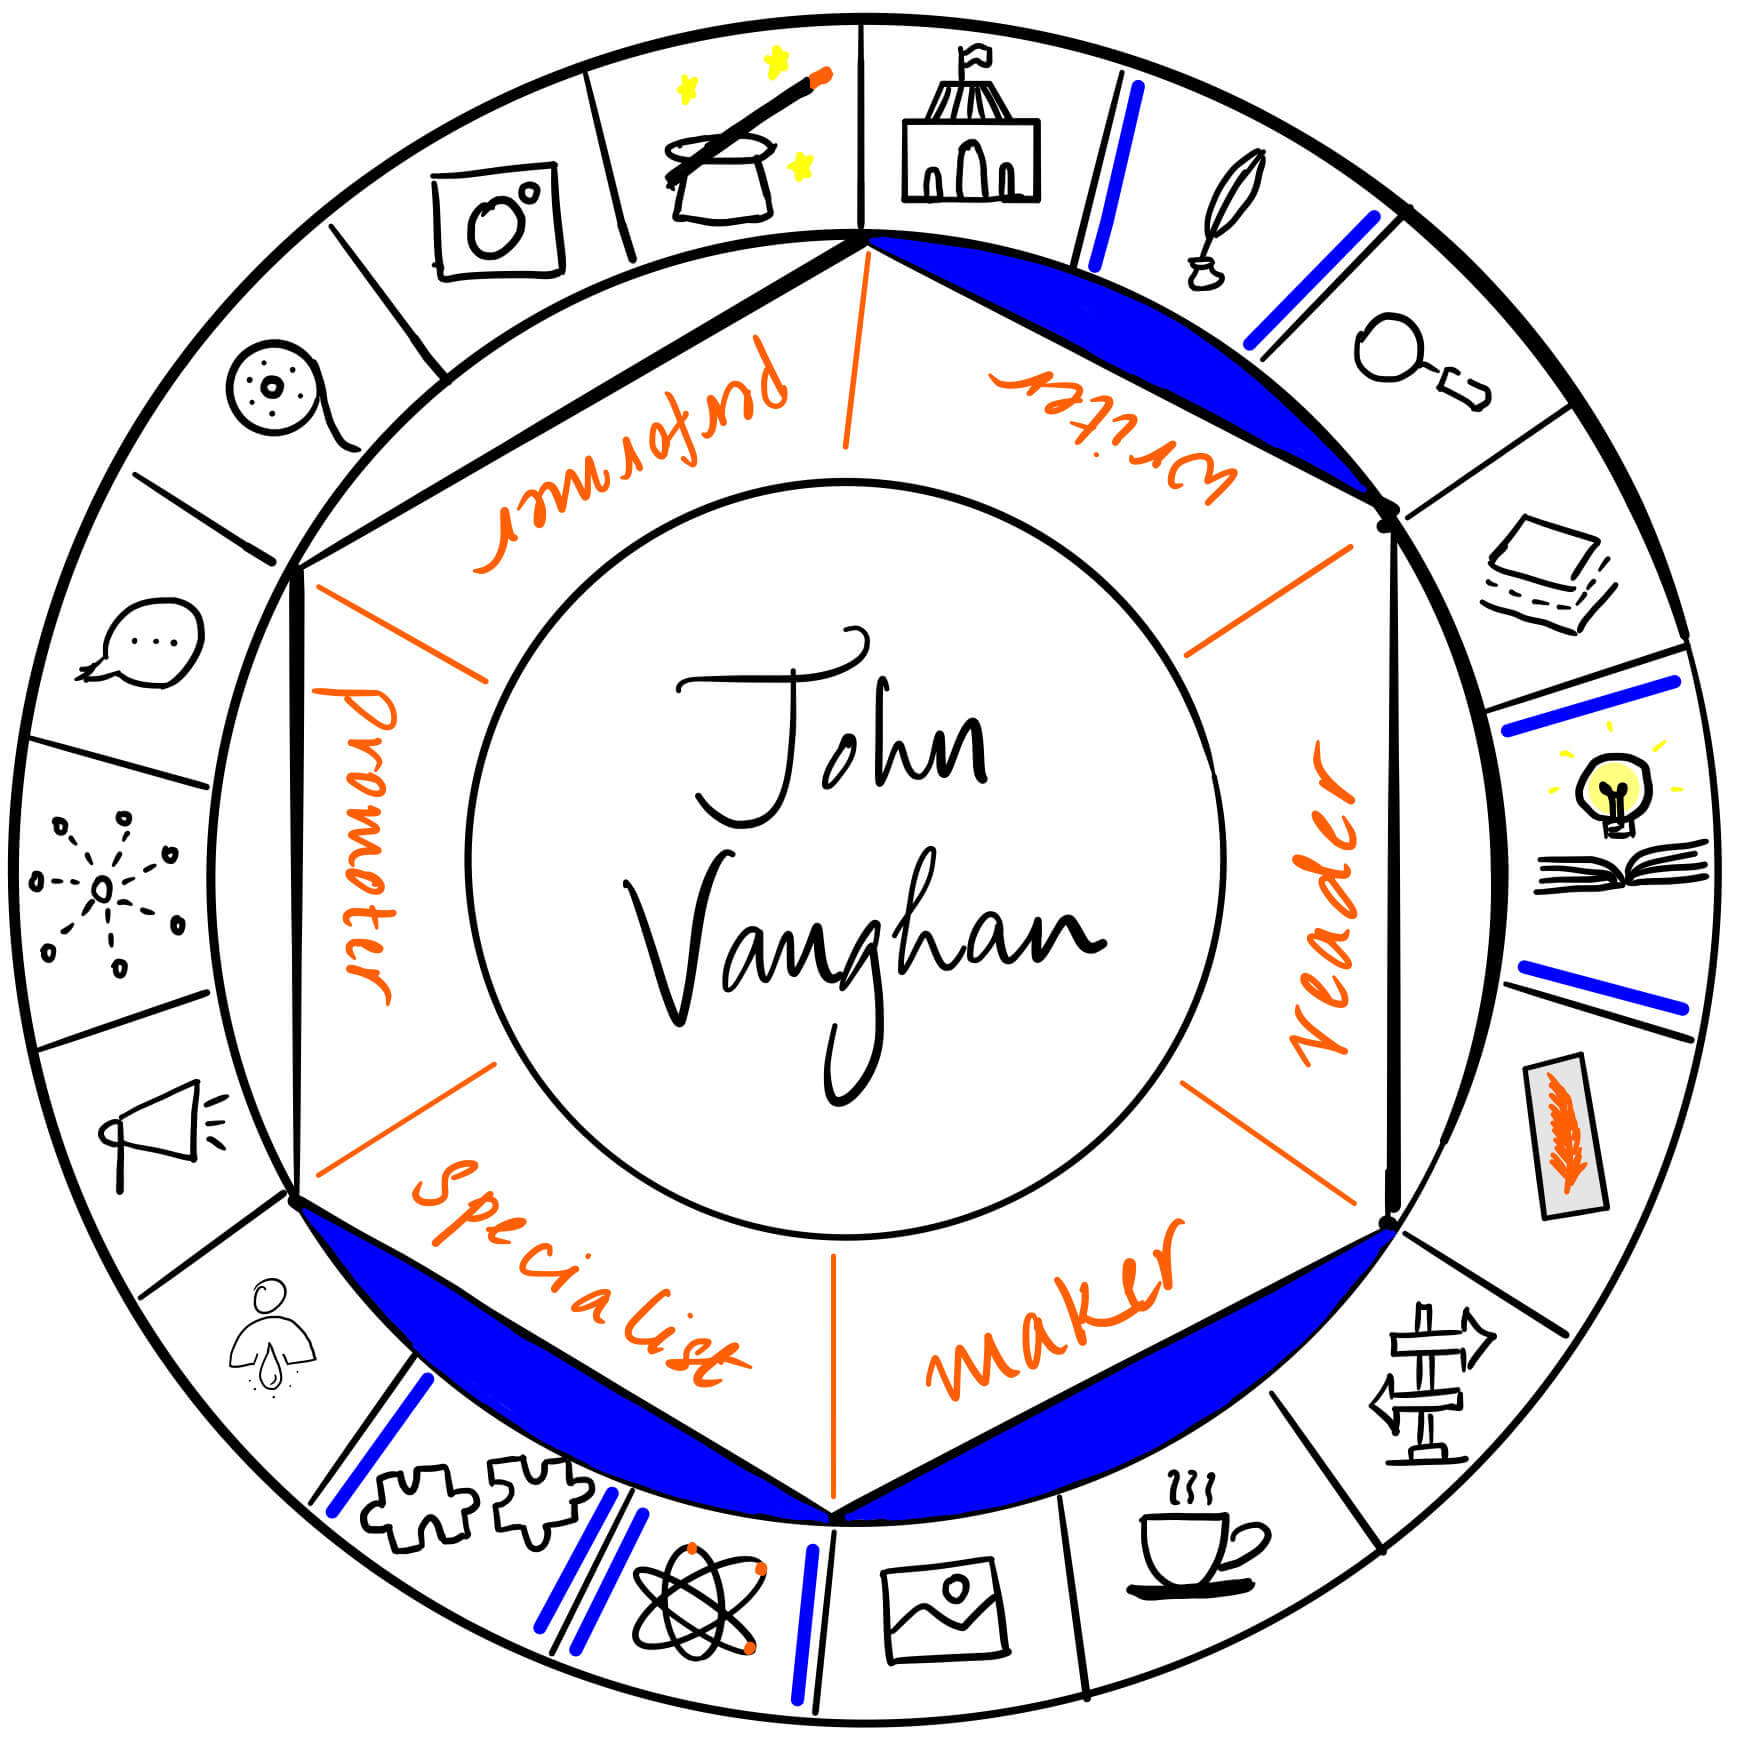 John Vaughan is a writer, maker and specialist. It's a pleasure to have him over on The Creator's Roulette to talk about screenplay and writing.